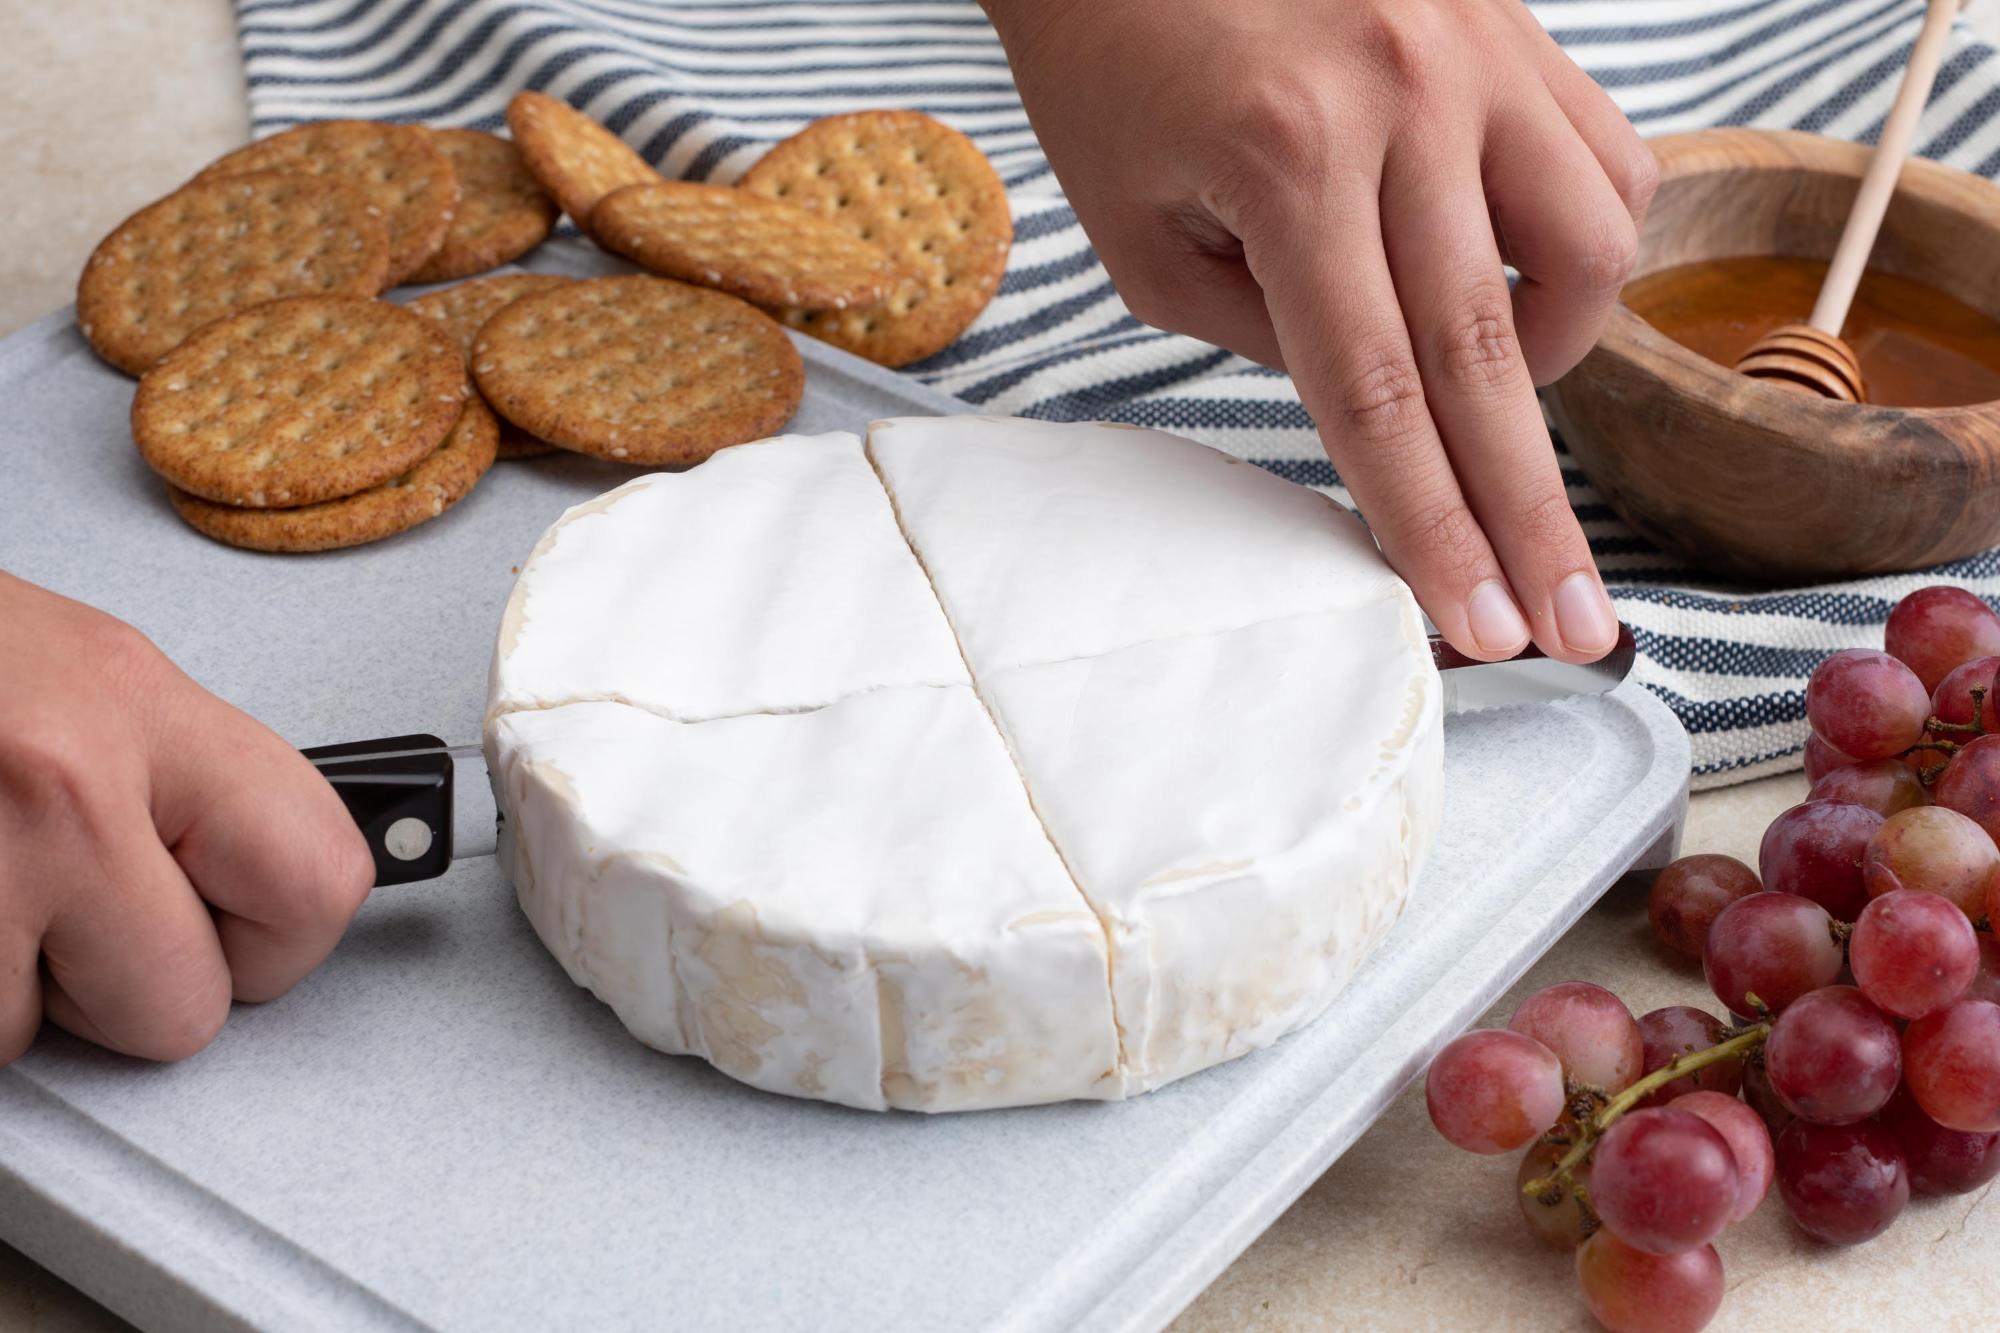 The Petite Slicer is good for a large wheel of brie.